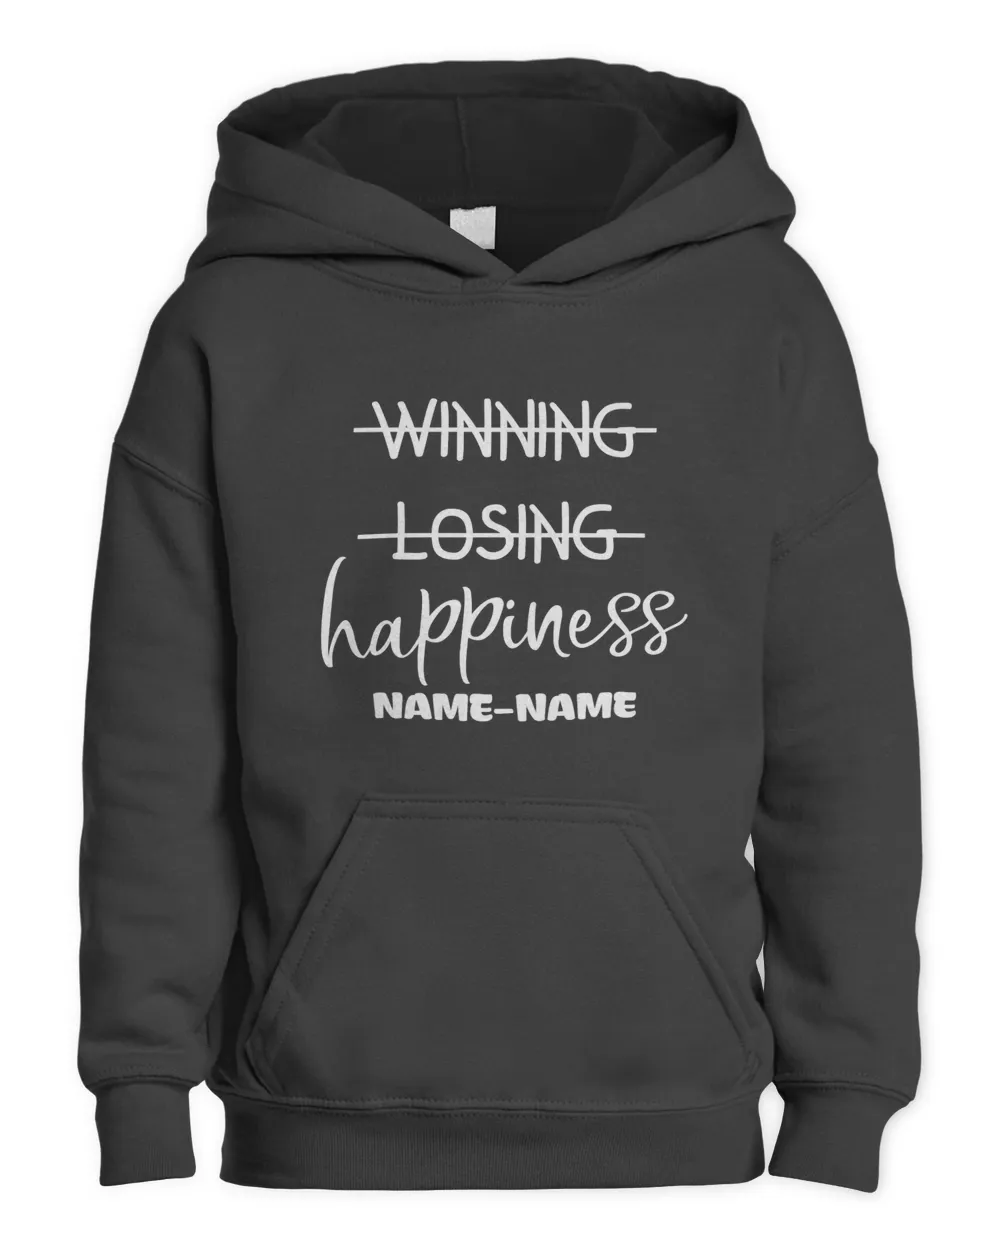 Choose Happiness, Not Winning or Losing